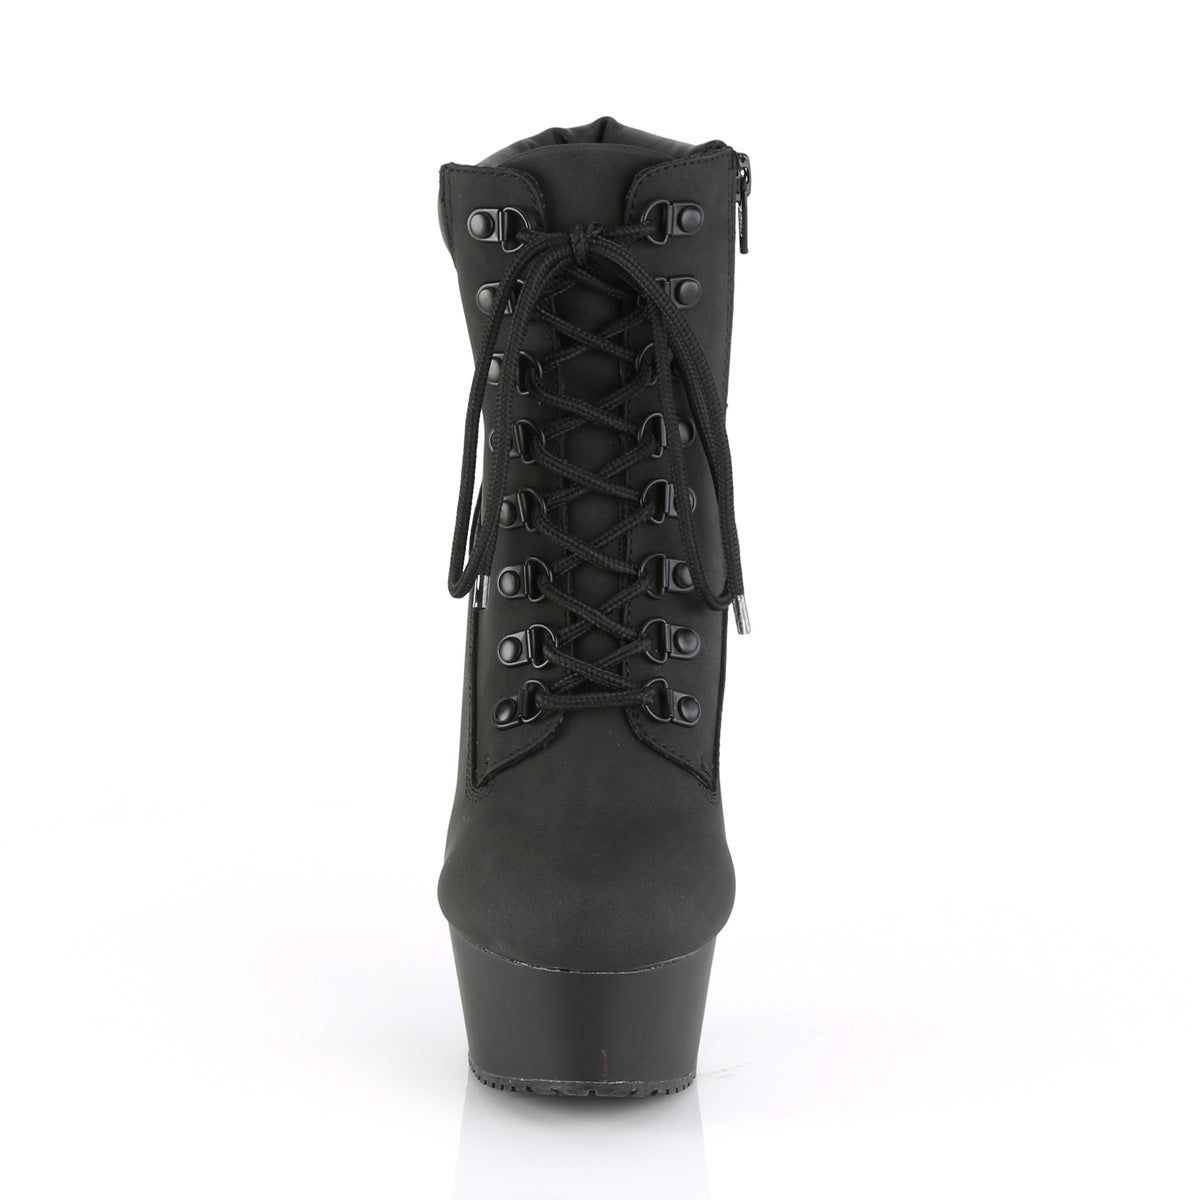 DELIGHT-600TL-02 Ankle Boots